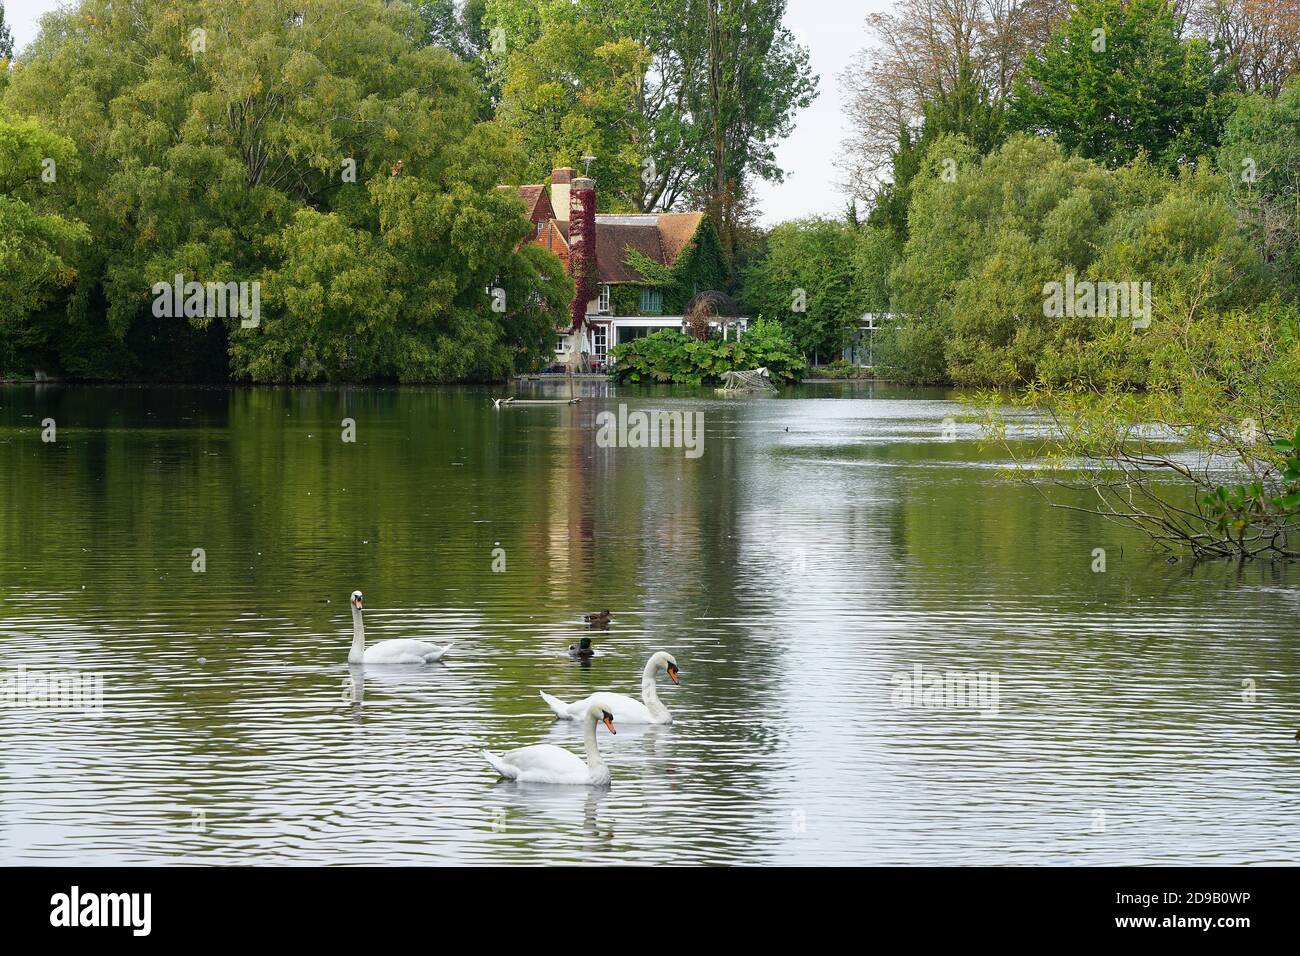 A view across the lake at Radwell, Hertfordshire Stock Photo